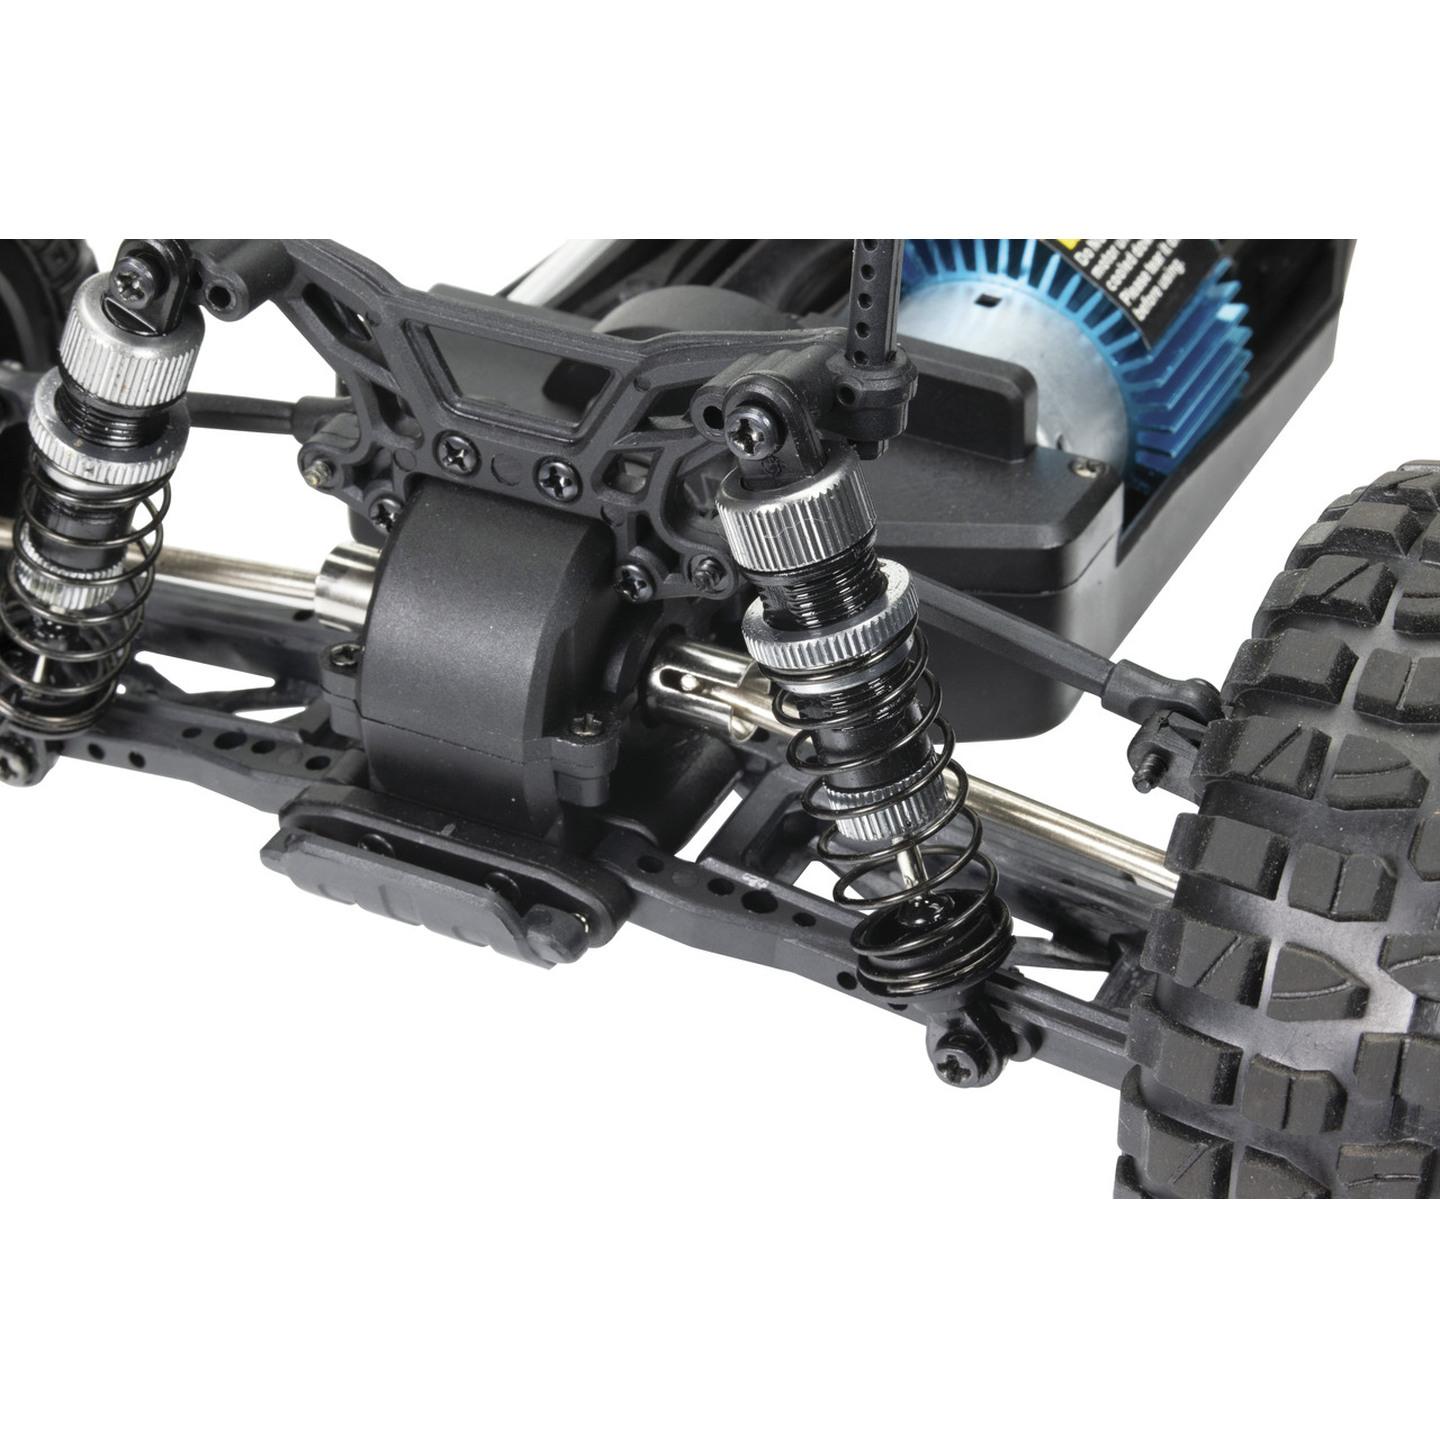 1:10 Scale High Speed R/C 4WD